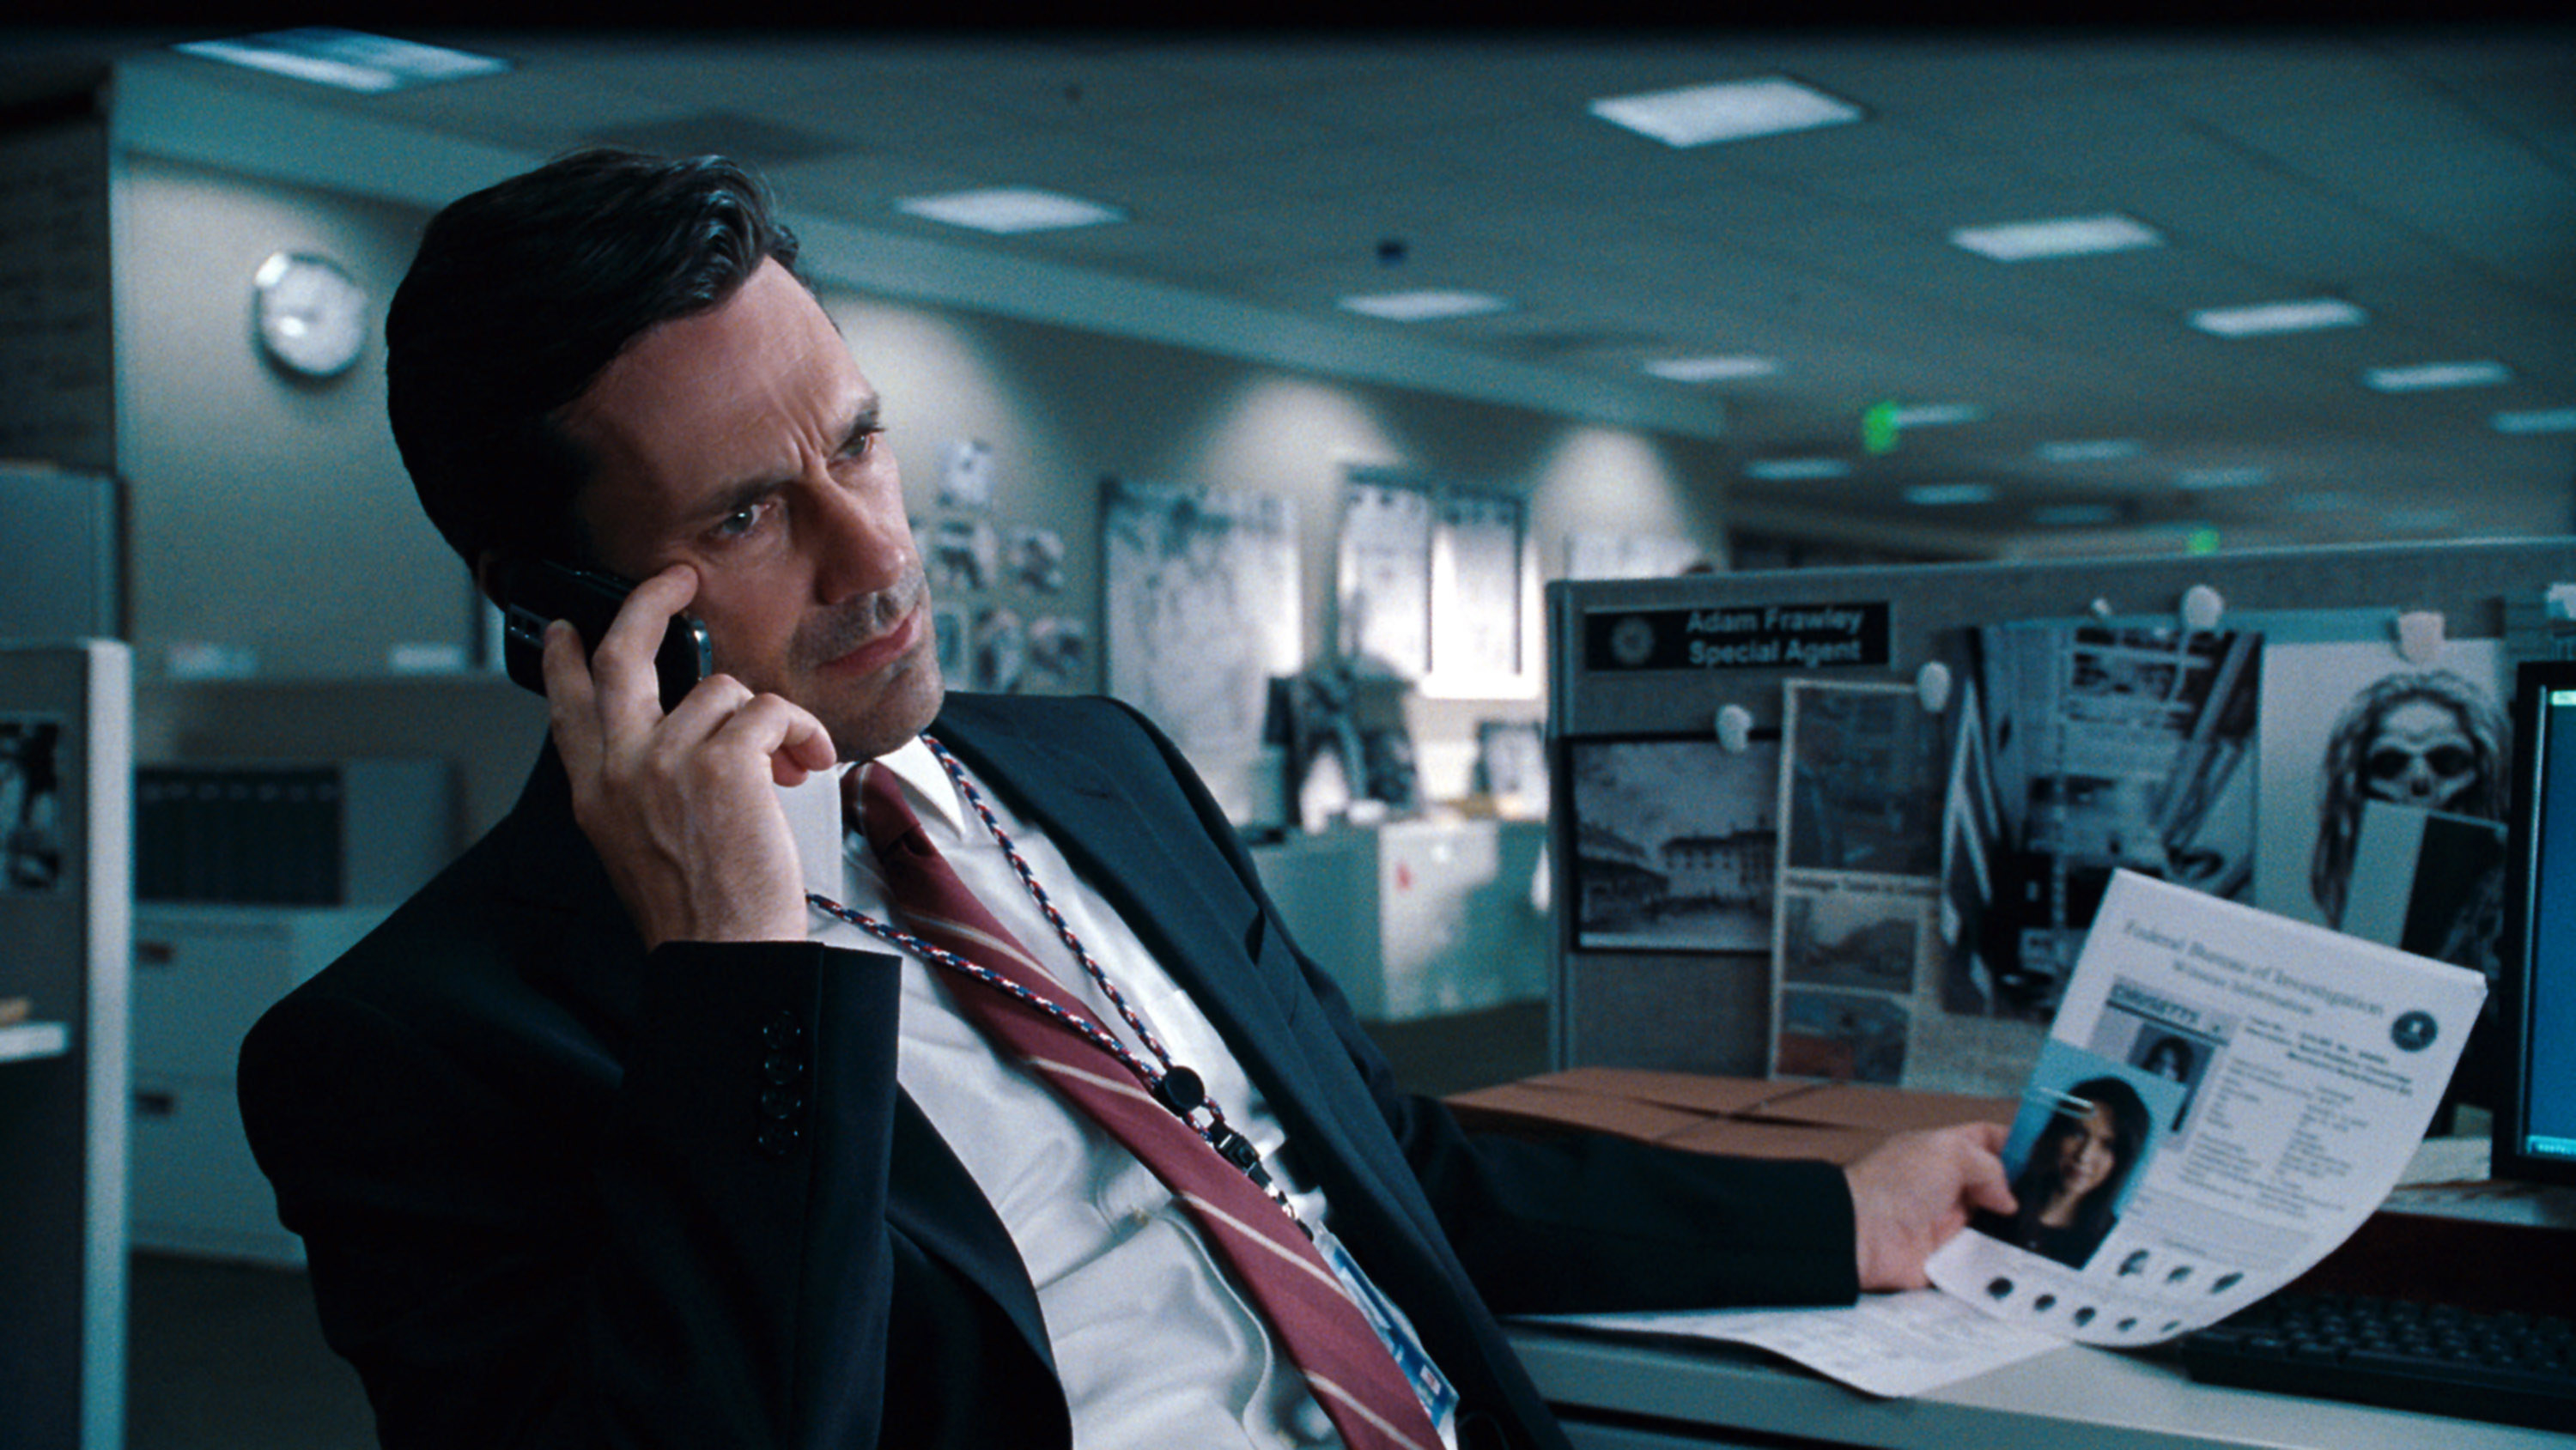 Jon Hamm as Adam Frawley, sitting in an office and talking on the phone